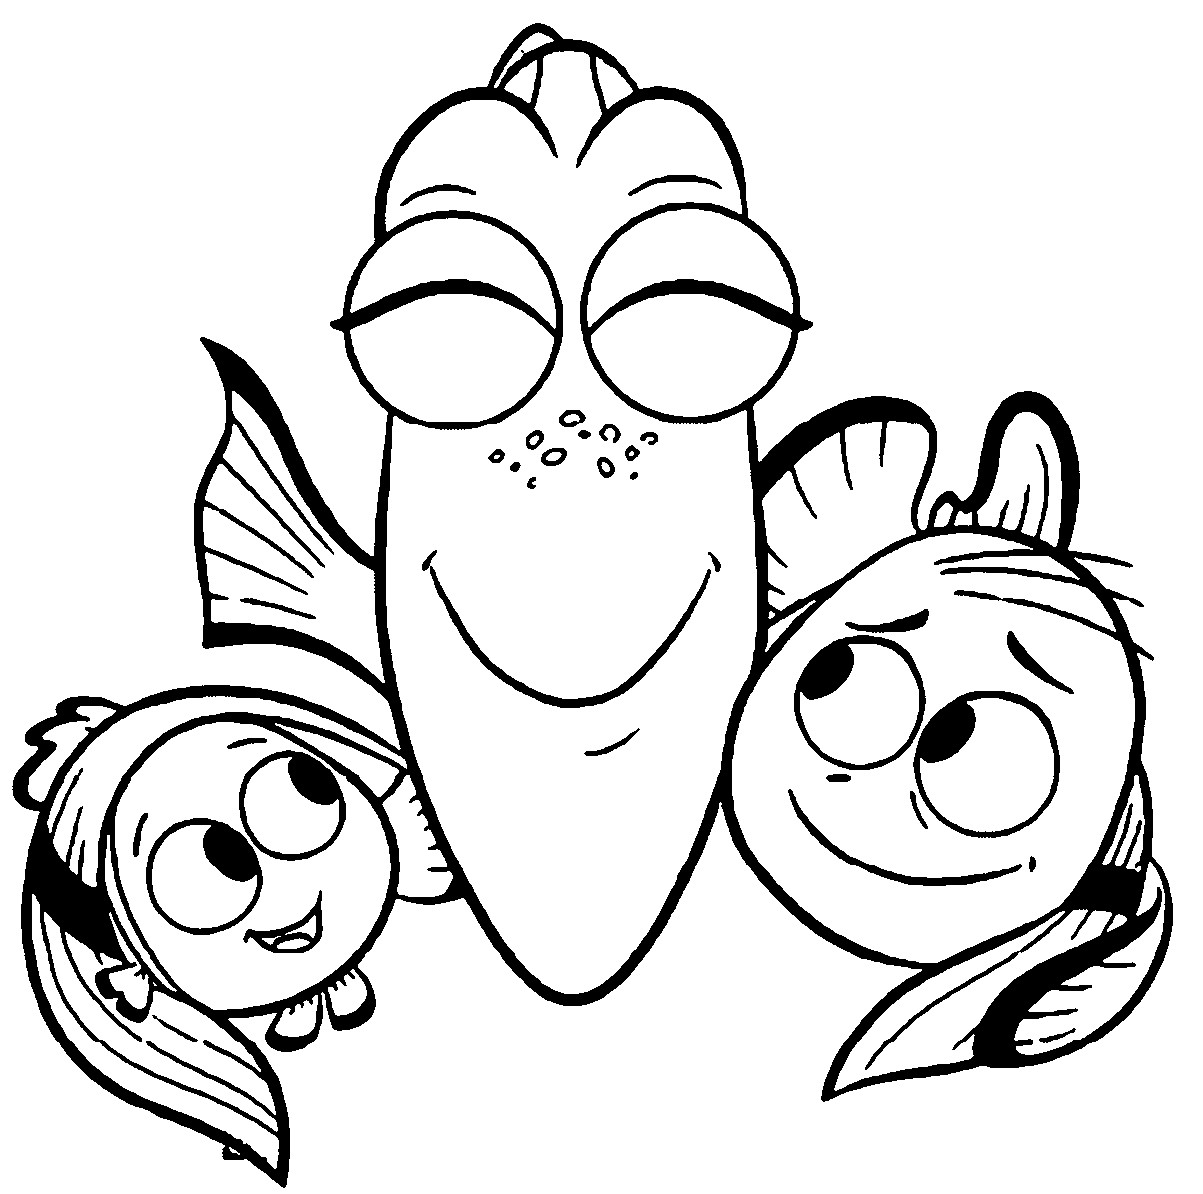 Kids Coloring Sheet
 Dory Coloring Pages Best Coloring Pages For Kids